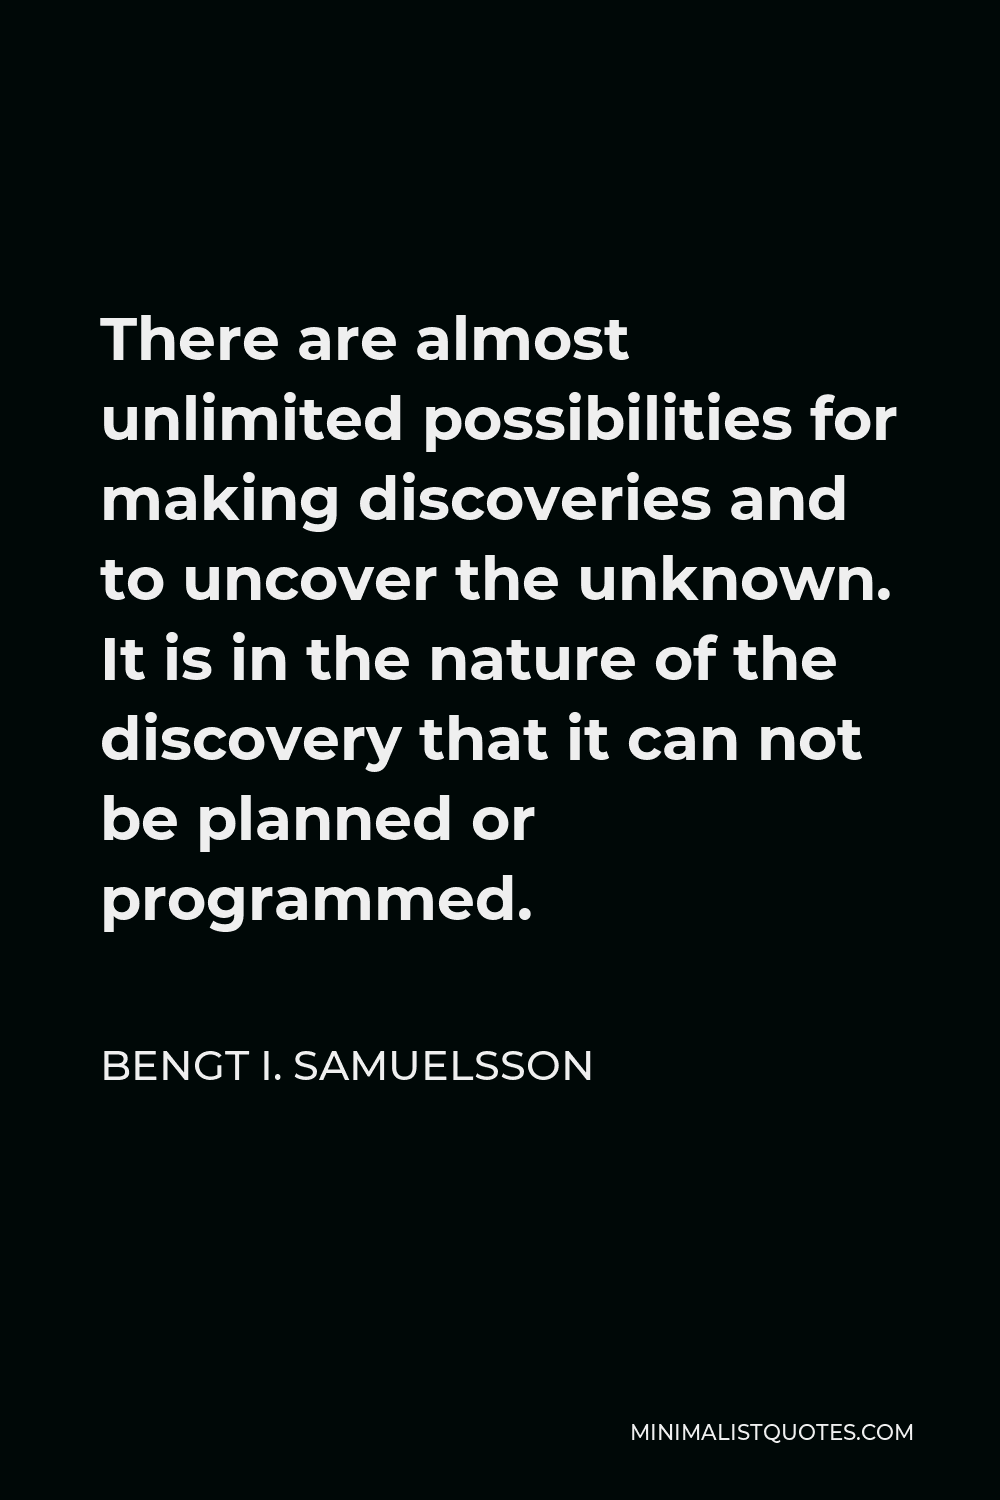 Bengt I. Samuelsson Quote - There are almost unlimited possibilities for making discoveries and to uncover the unknown. It is in the nature of the discovery that it can not be planned or programmed.